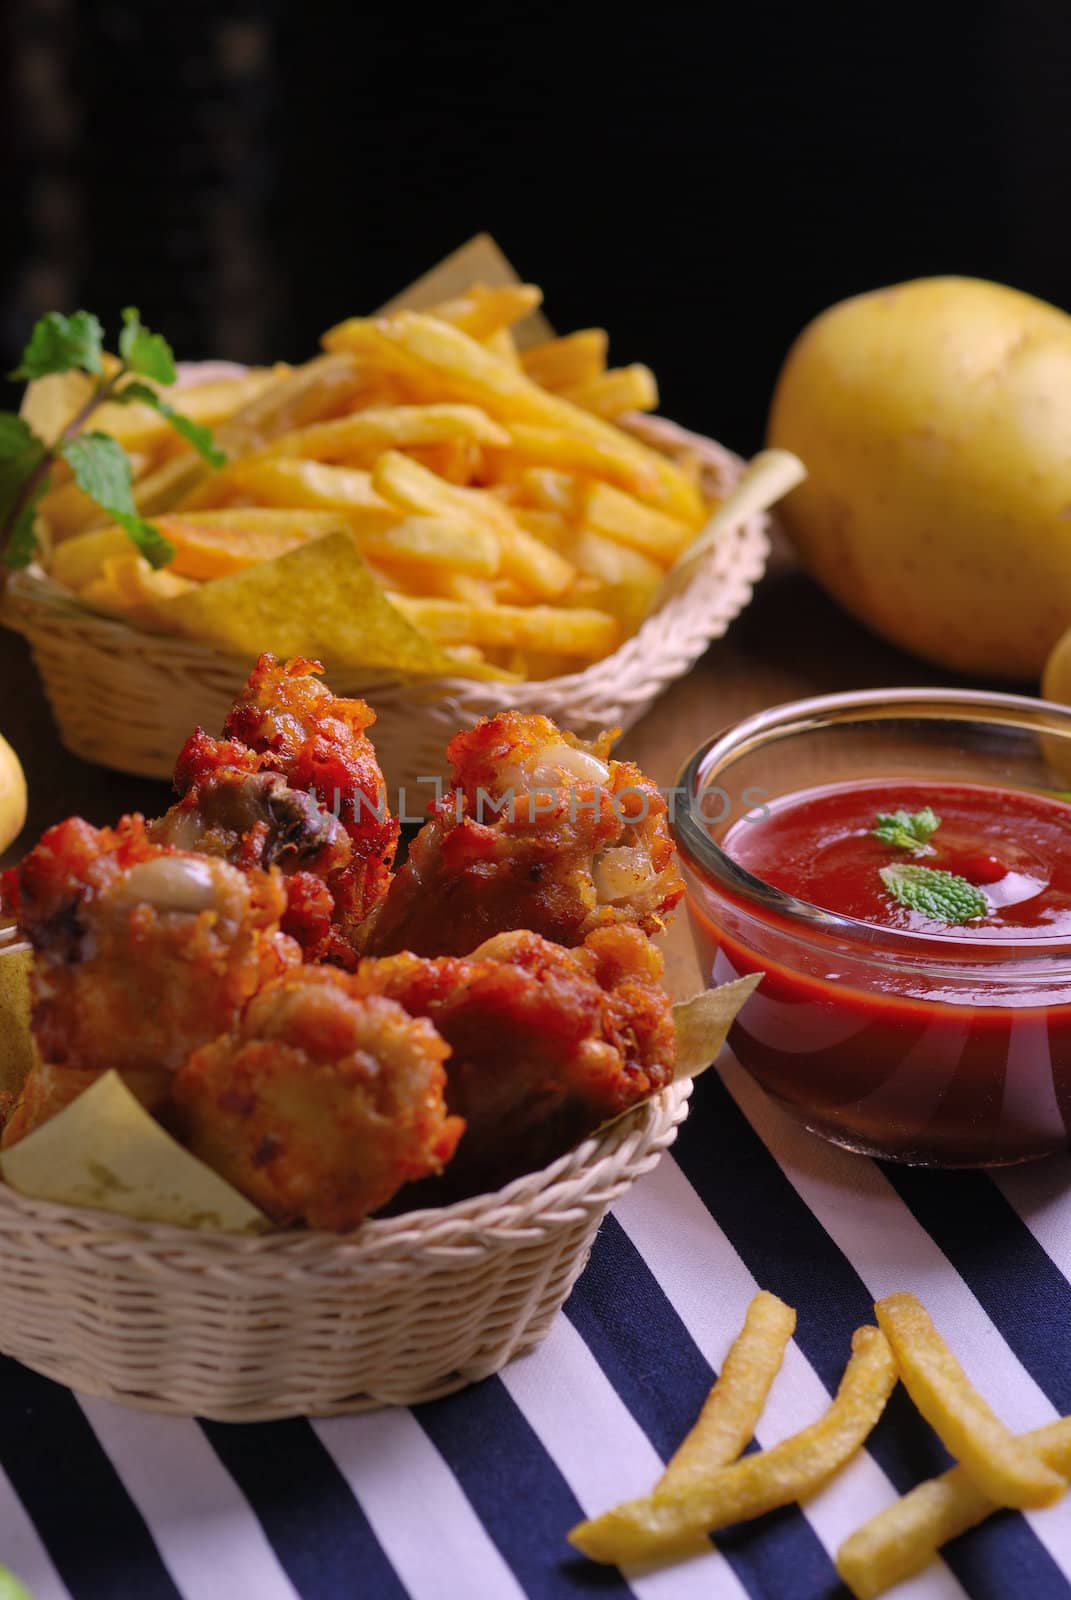 fried chicken wings with french fries and ketchup